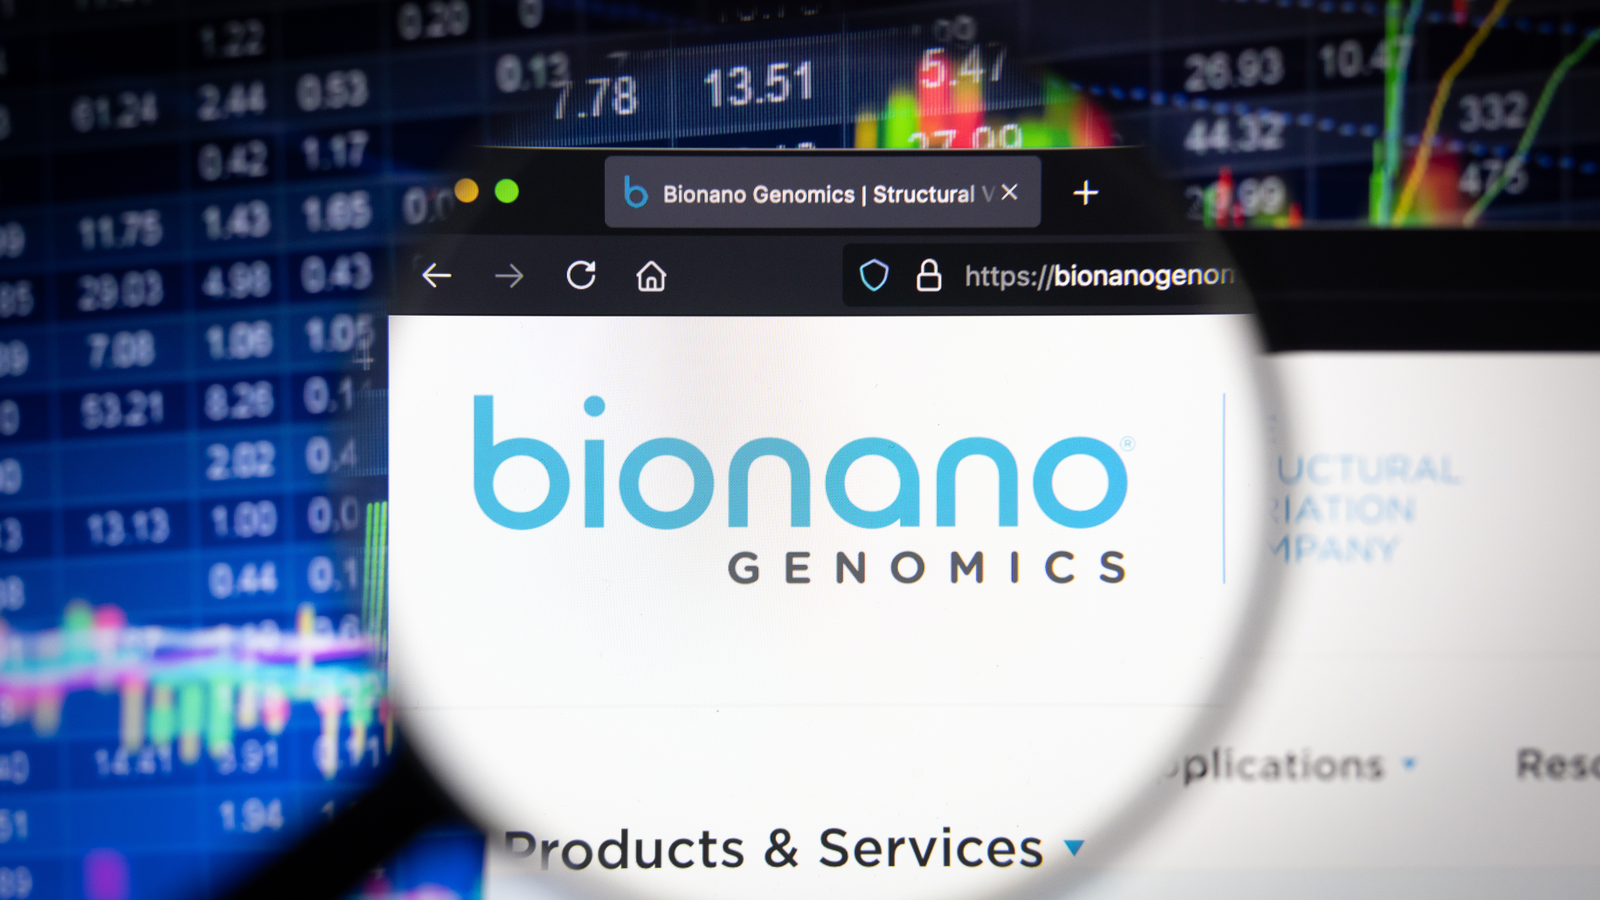 Bionano Genomics (BNGO) company logo on a website with blurry stock market developments in the background